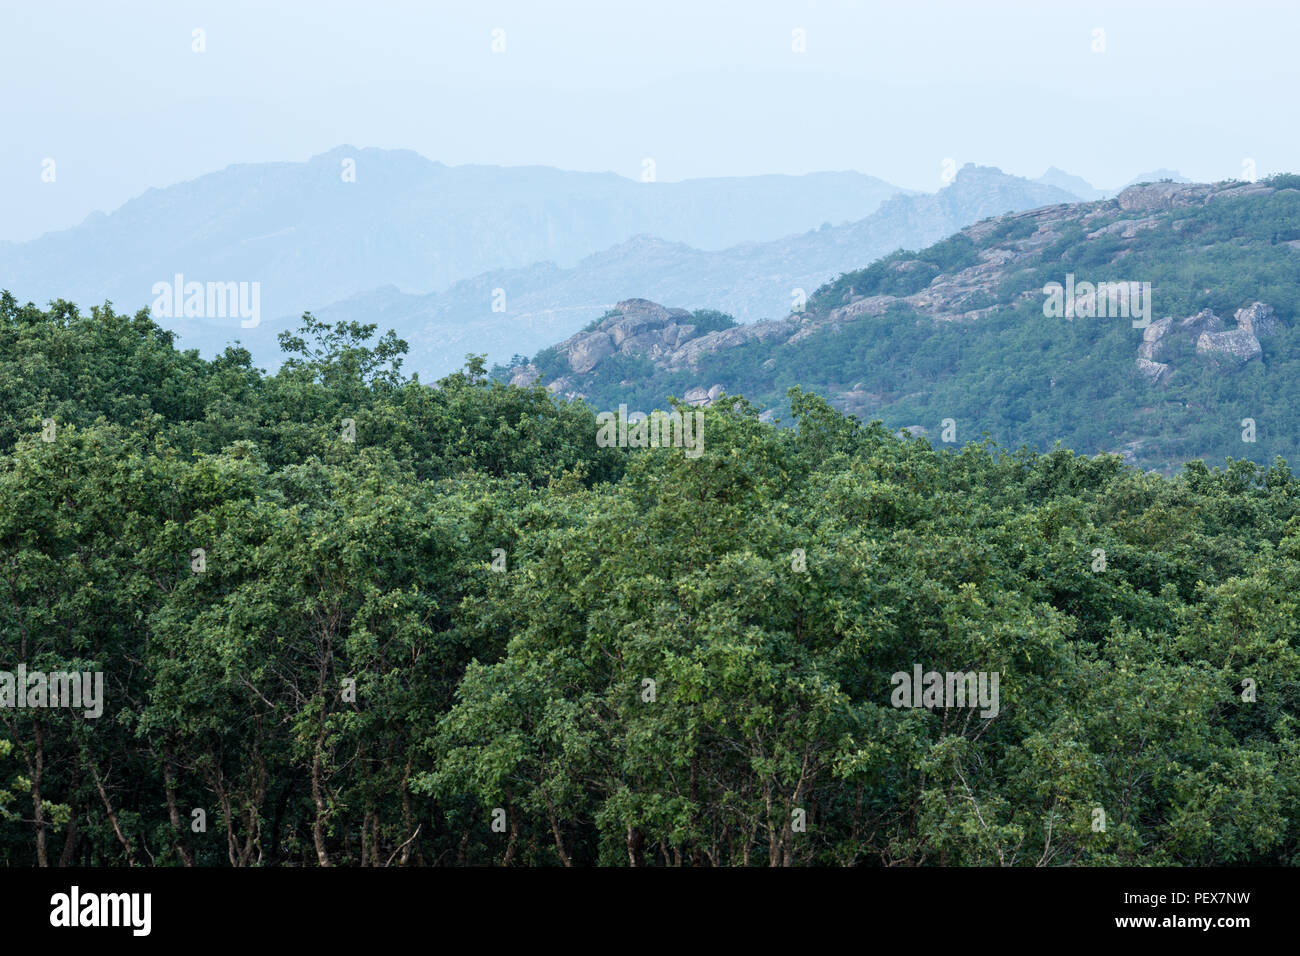 stunted oak forest with mountains behind, Pitoes das Junias, Alto Tras os Montes, Norte, Portugal. Stock Photo